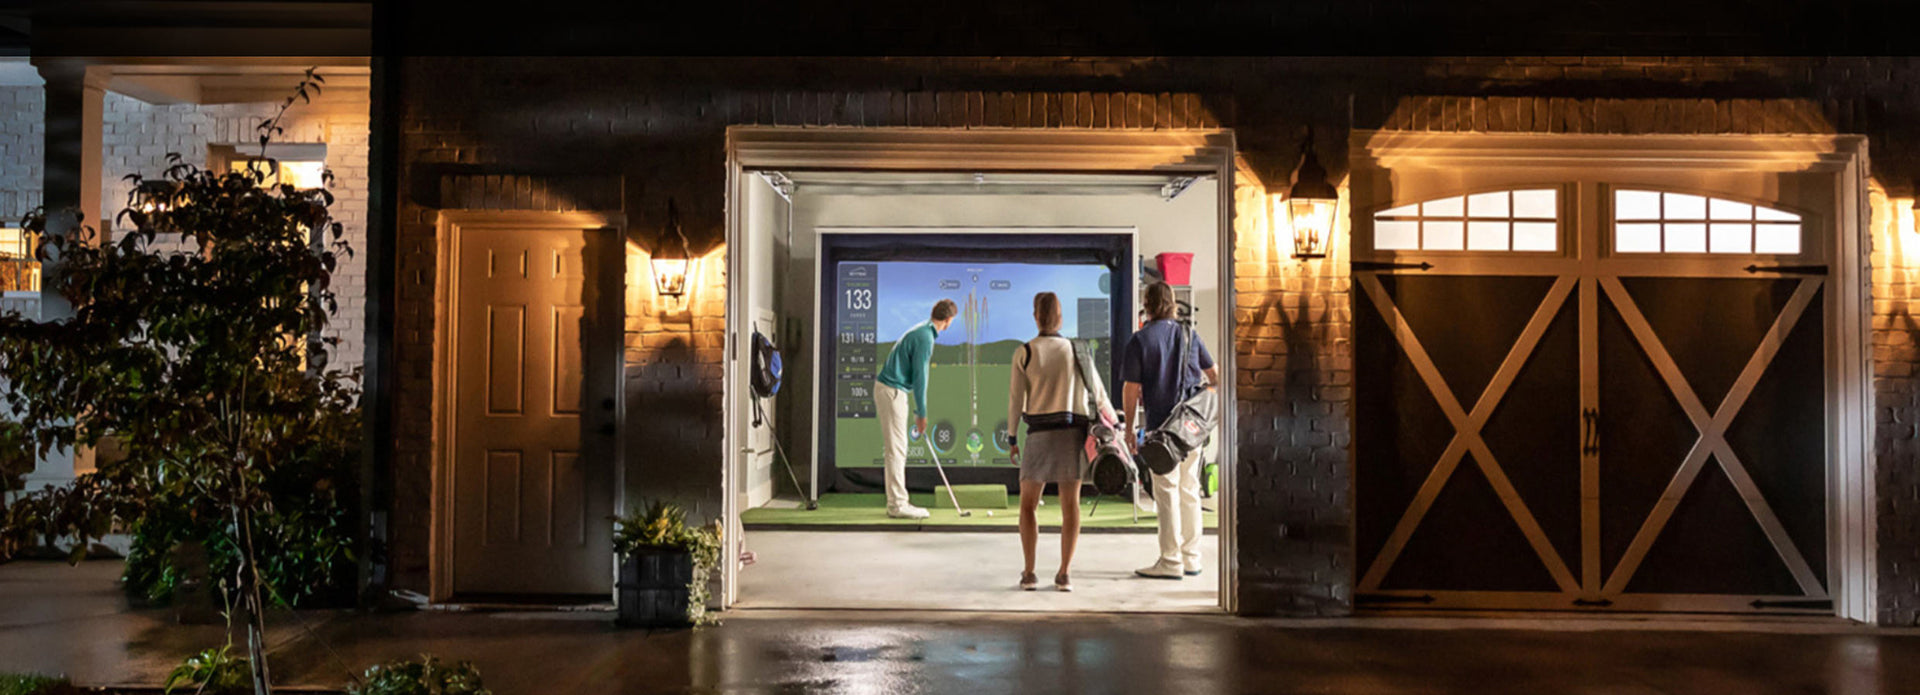 View from outside a double garage with two men watching another golfer hit into an impact screen in a garage golf simulator